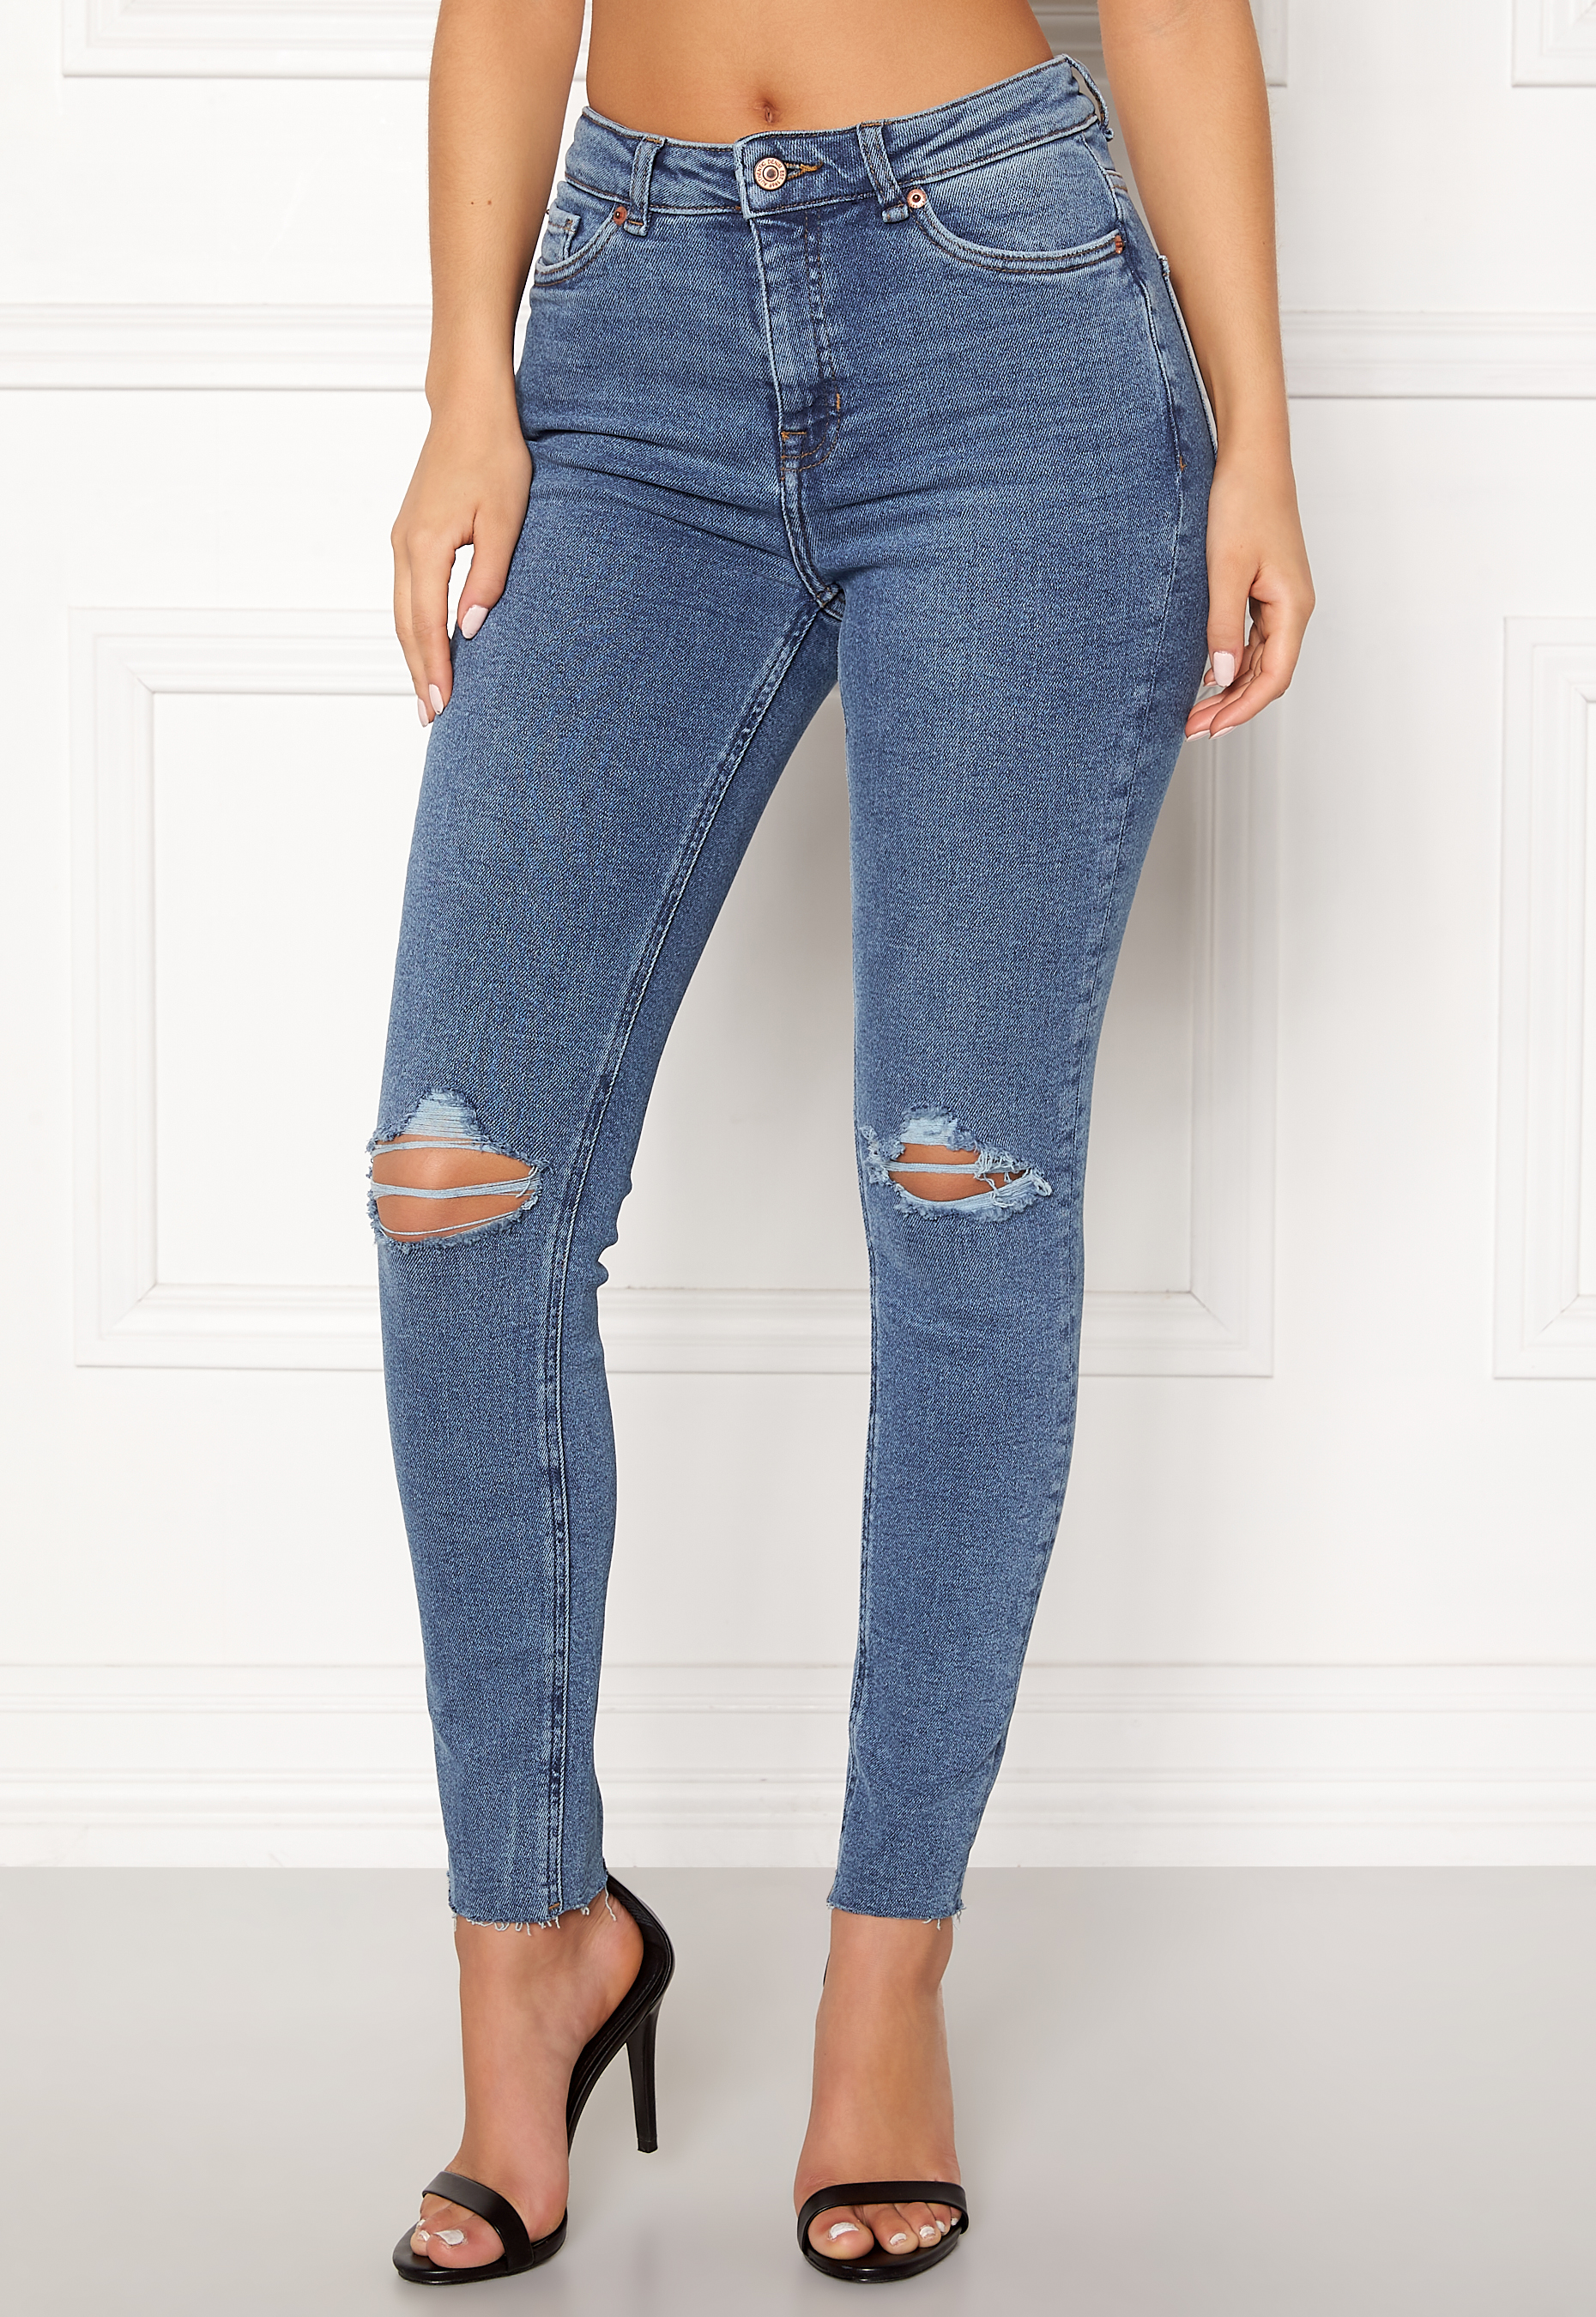 size 30 men's jeans to women's